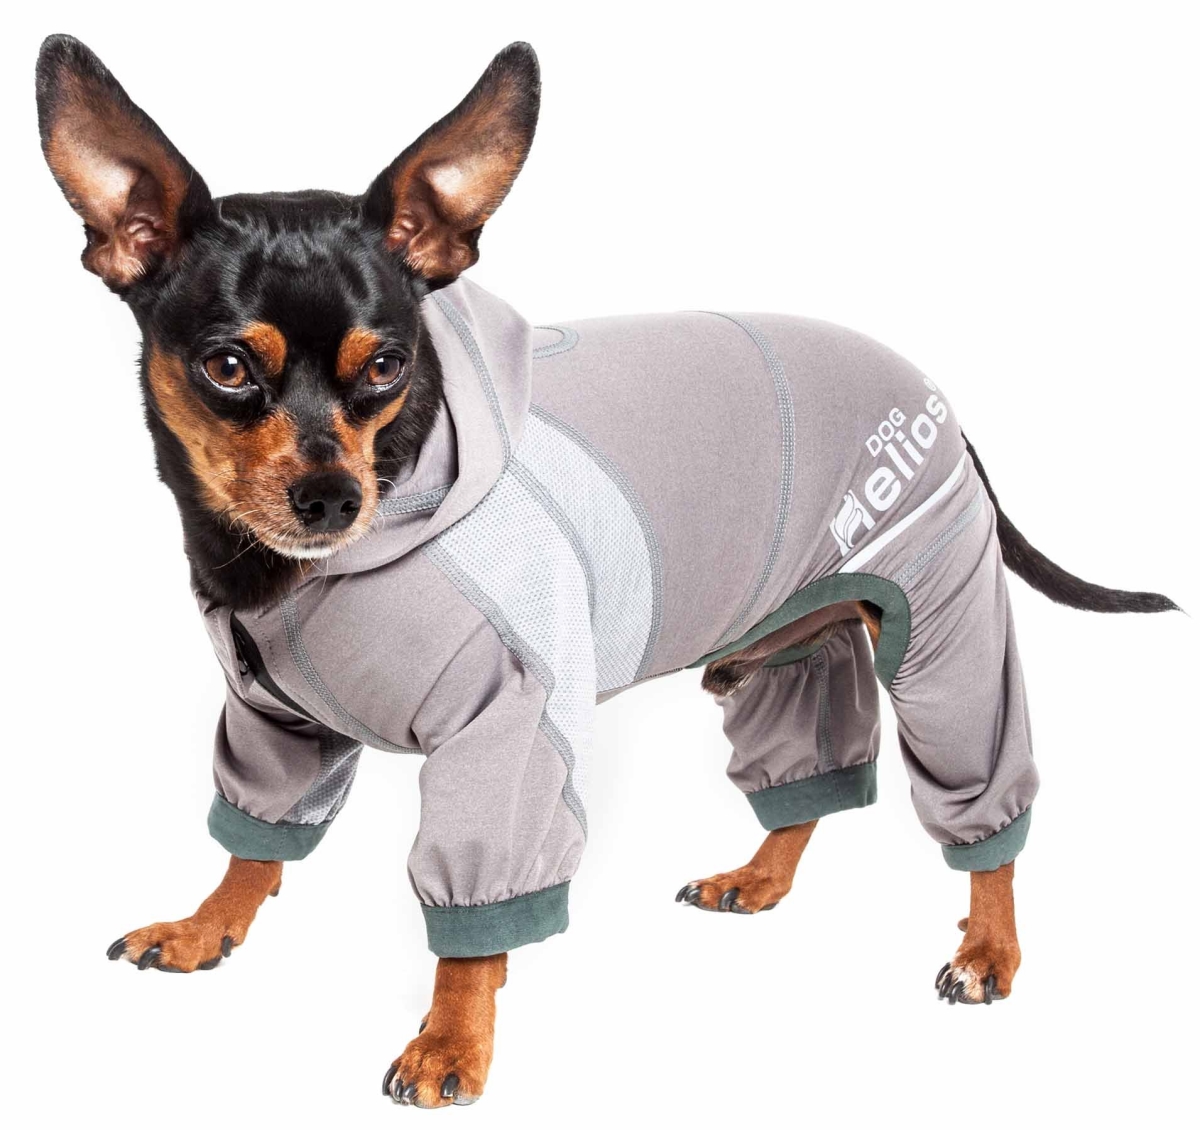 Yghl7gysm Namastail 4-way Stretch Breathable Full Bodied Performance Yoga Dog Hoodie Tracksuit - Grey, Small